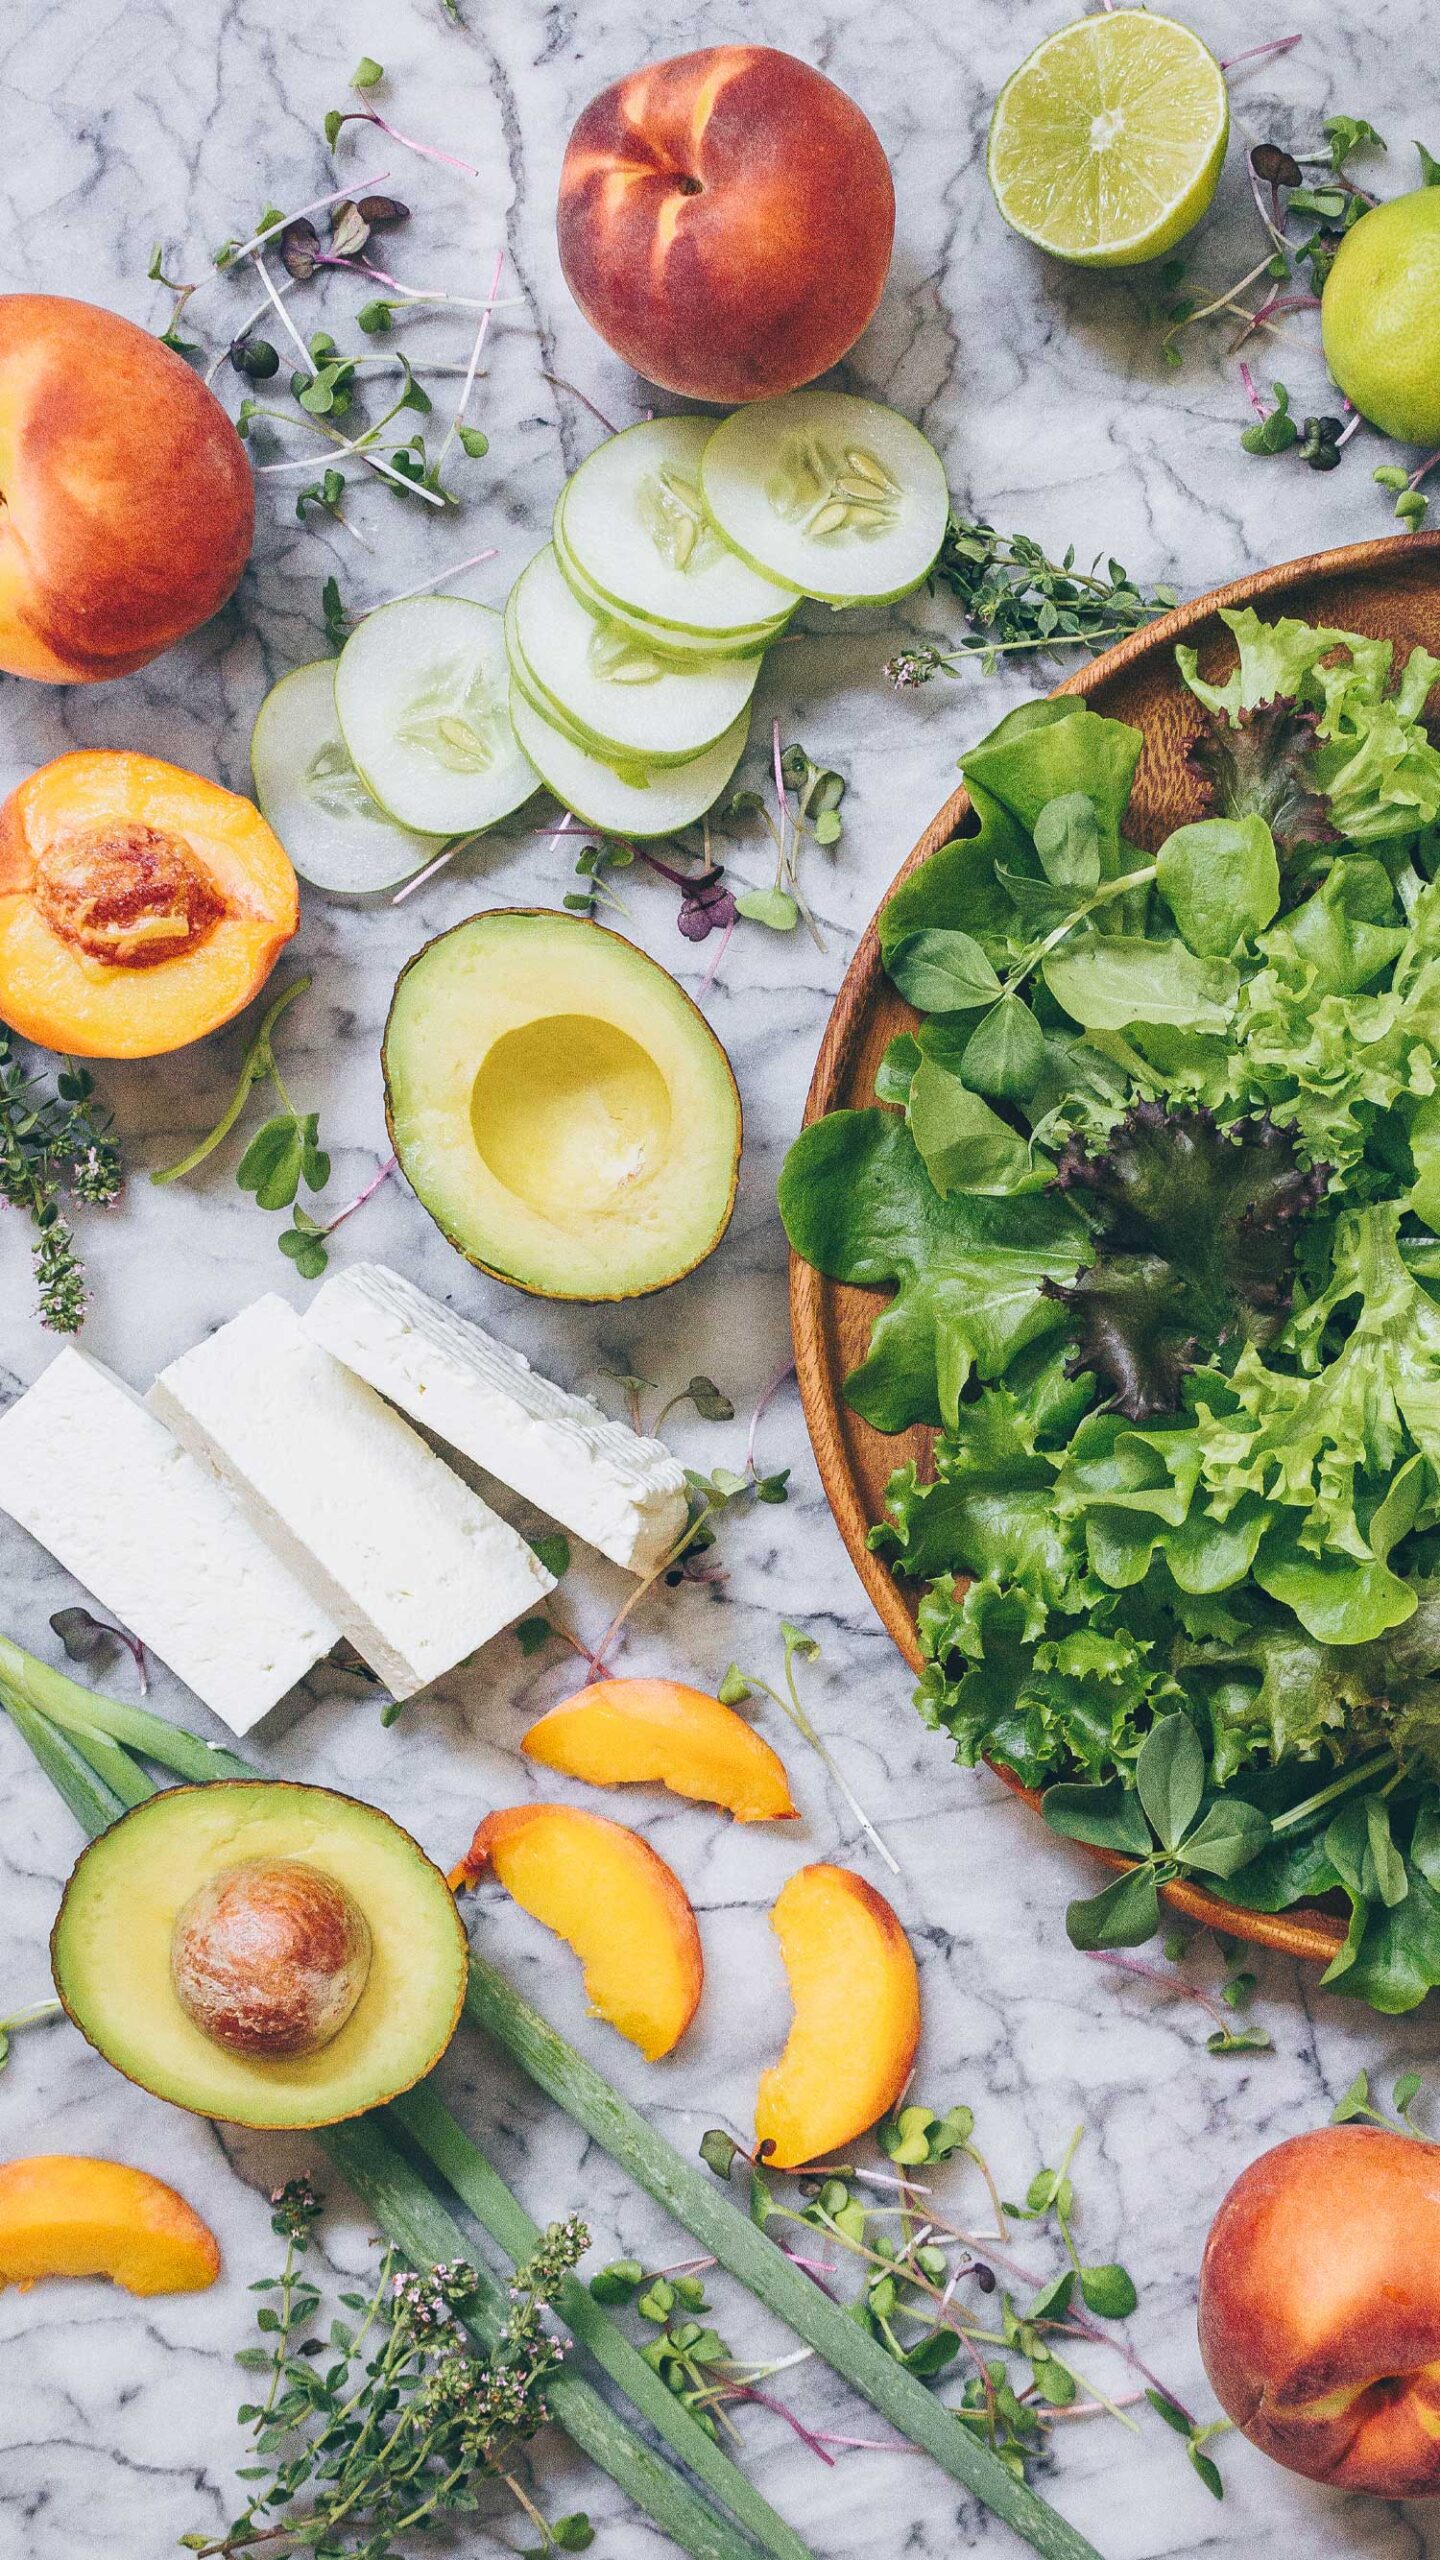 The ingredients for Peach, Avocado and Feta Cheese Salad laid out on a marble counter: peaches, avocado, feta cheese, cucumber, salad greens, limes, and thyme.